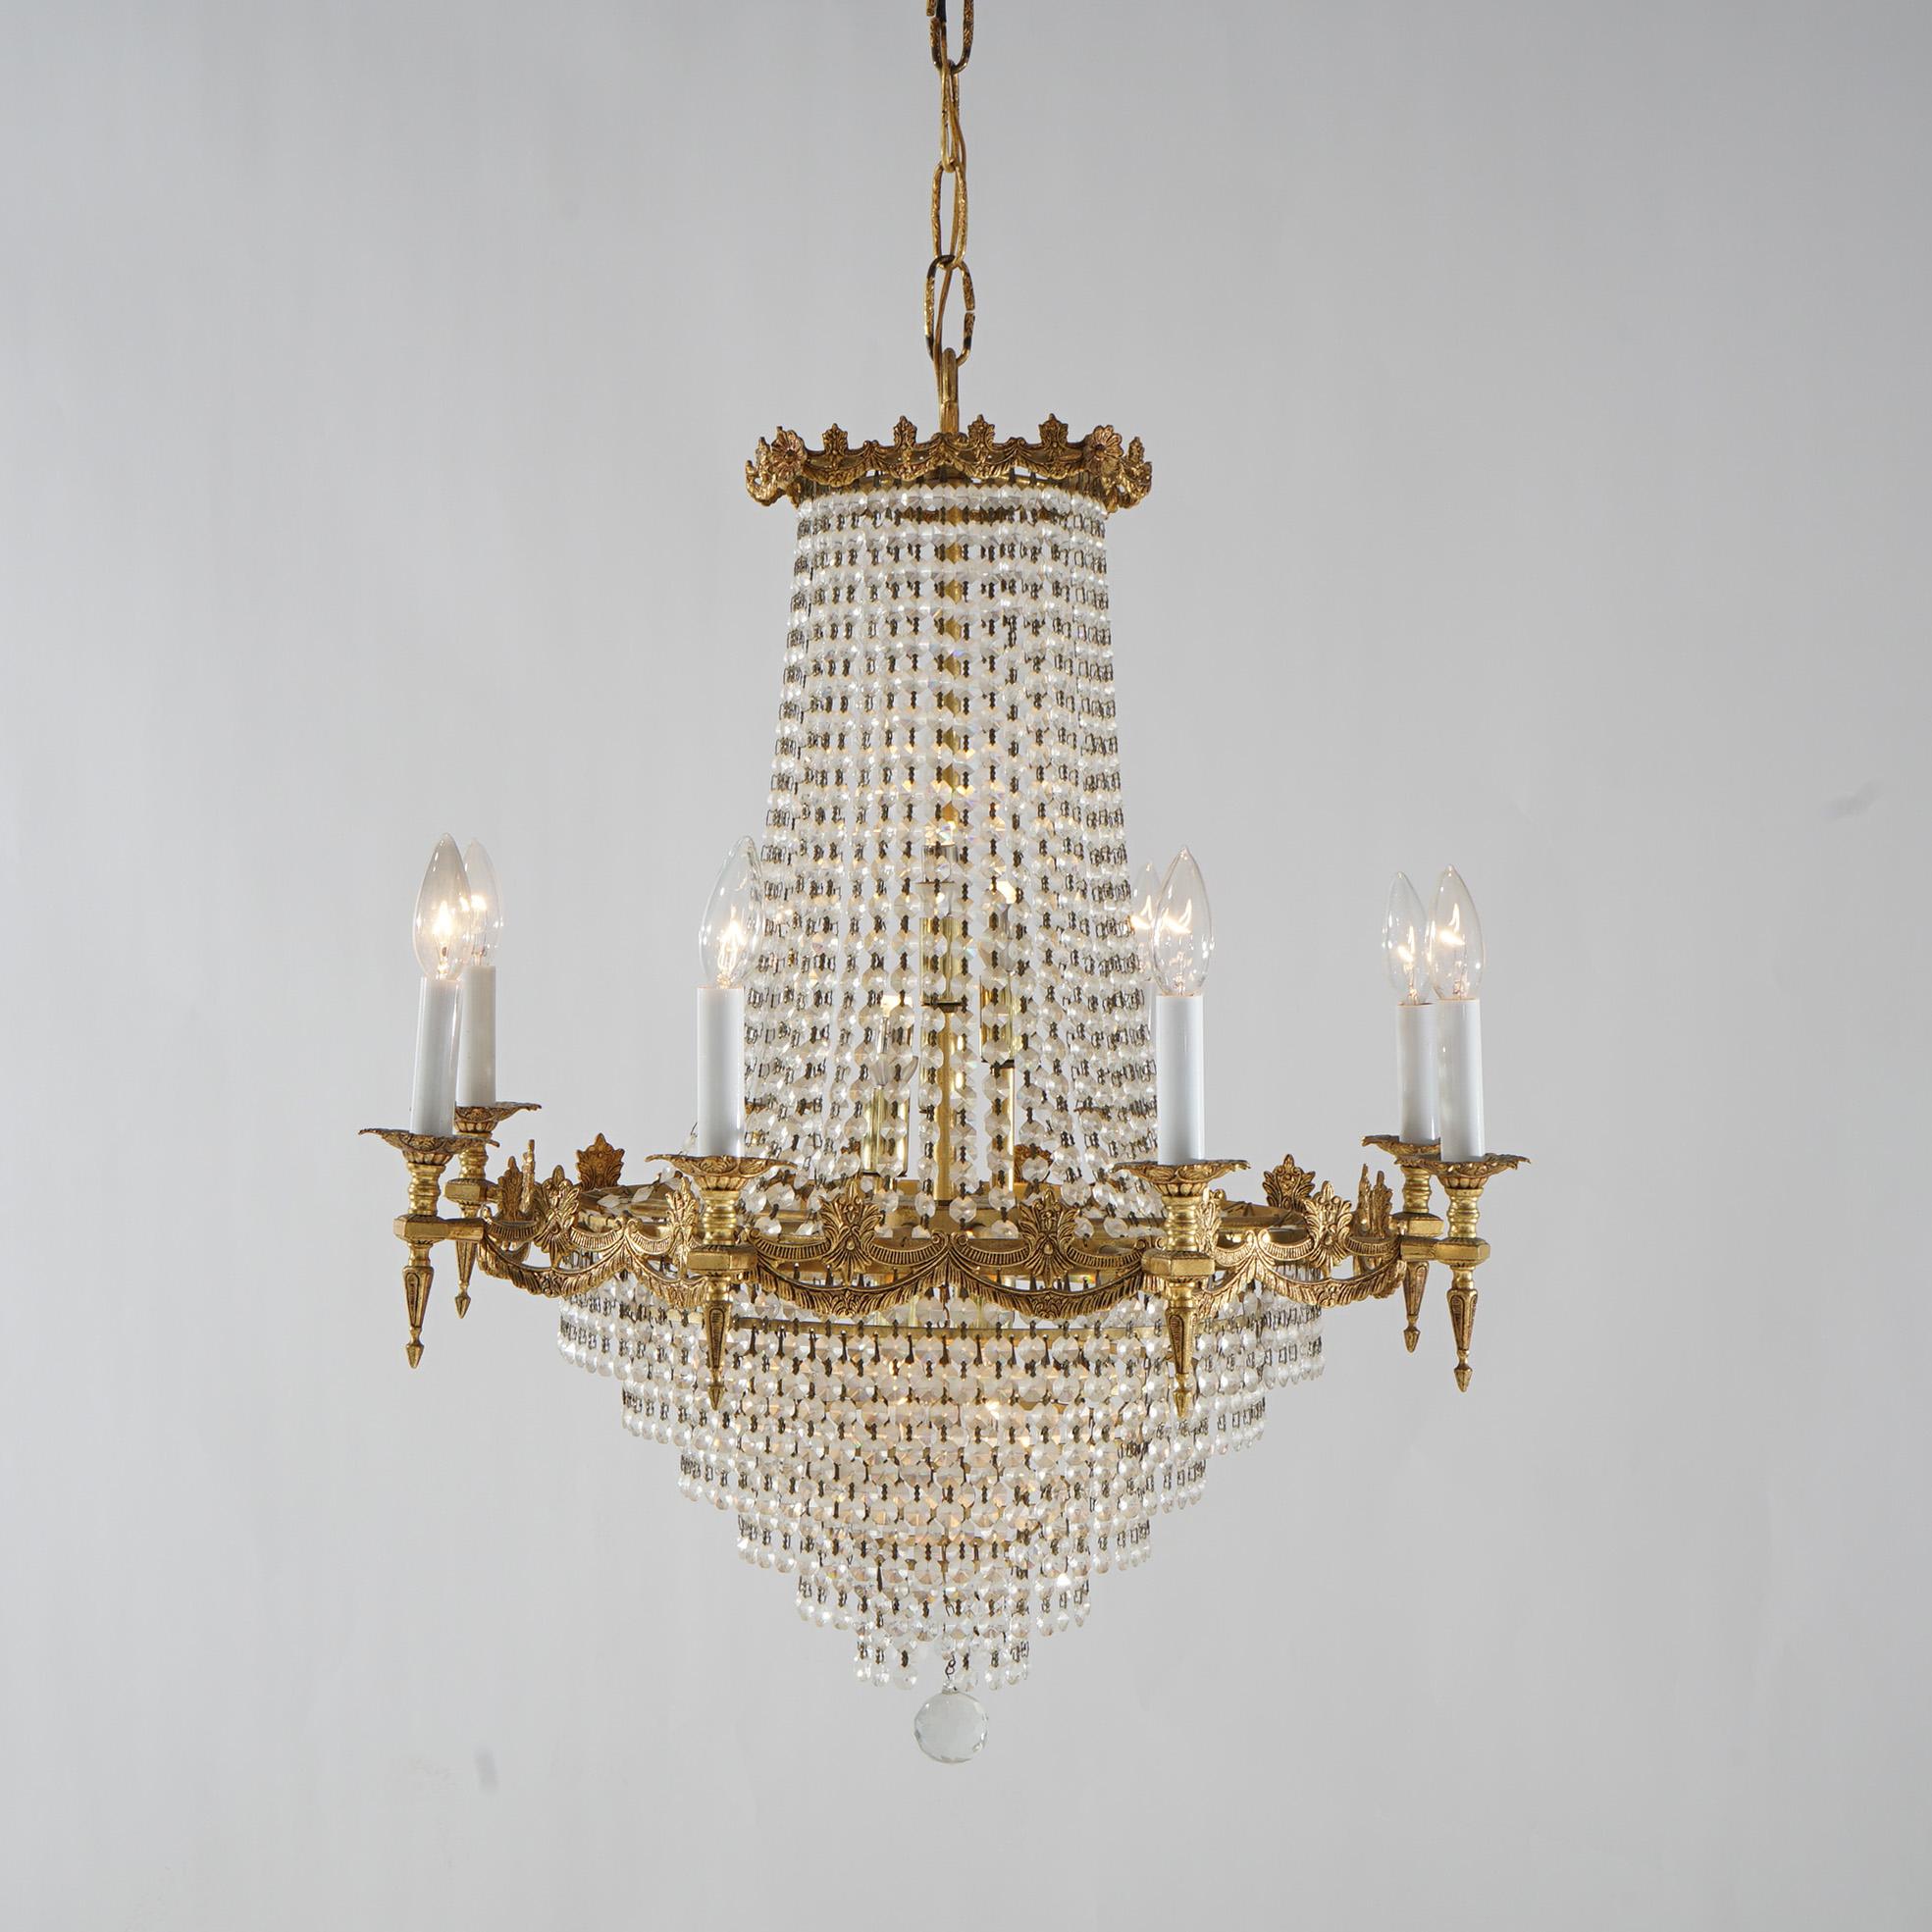 A French Empire style wedding cake chandelier offers gilt bronze frame with twelve arms terminating in candle lights and strung crystals throughout, 20th century

Measures - 39